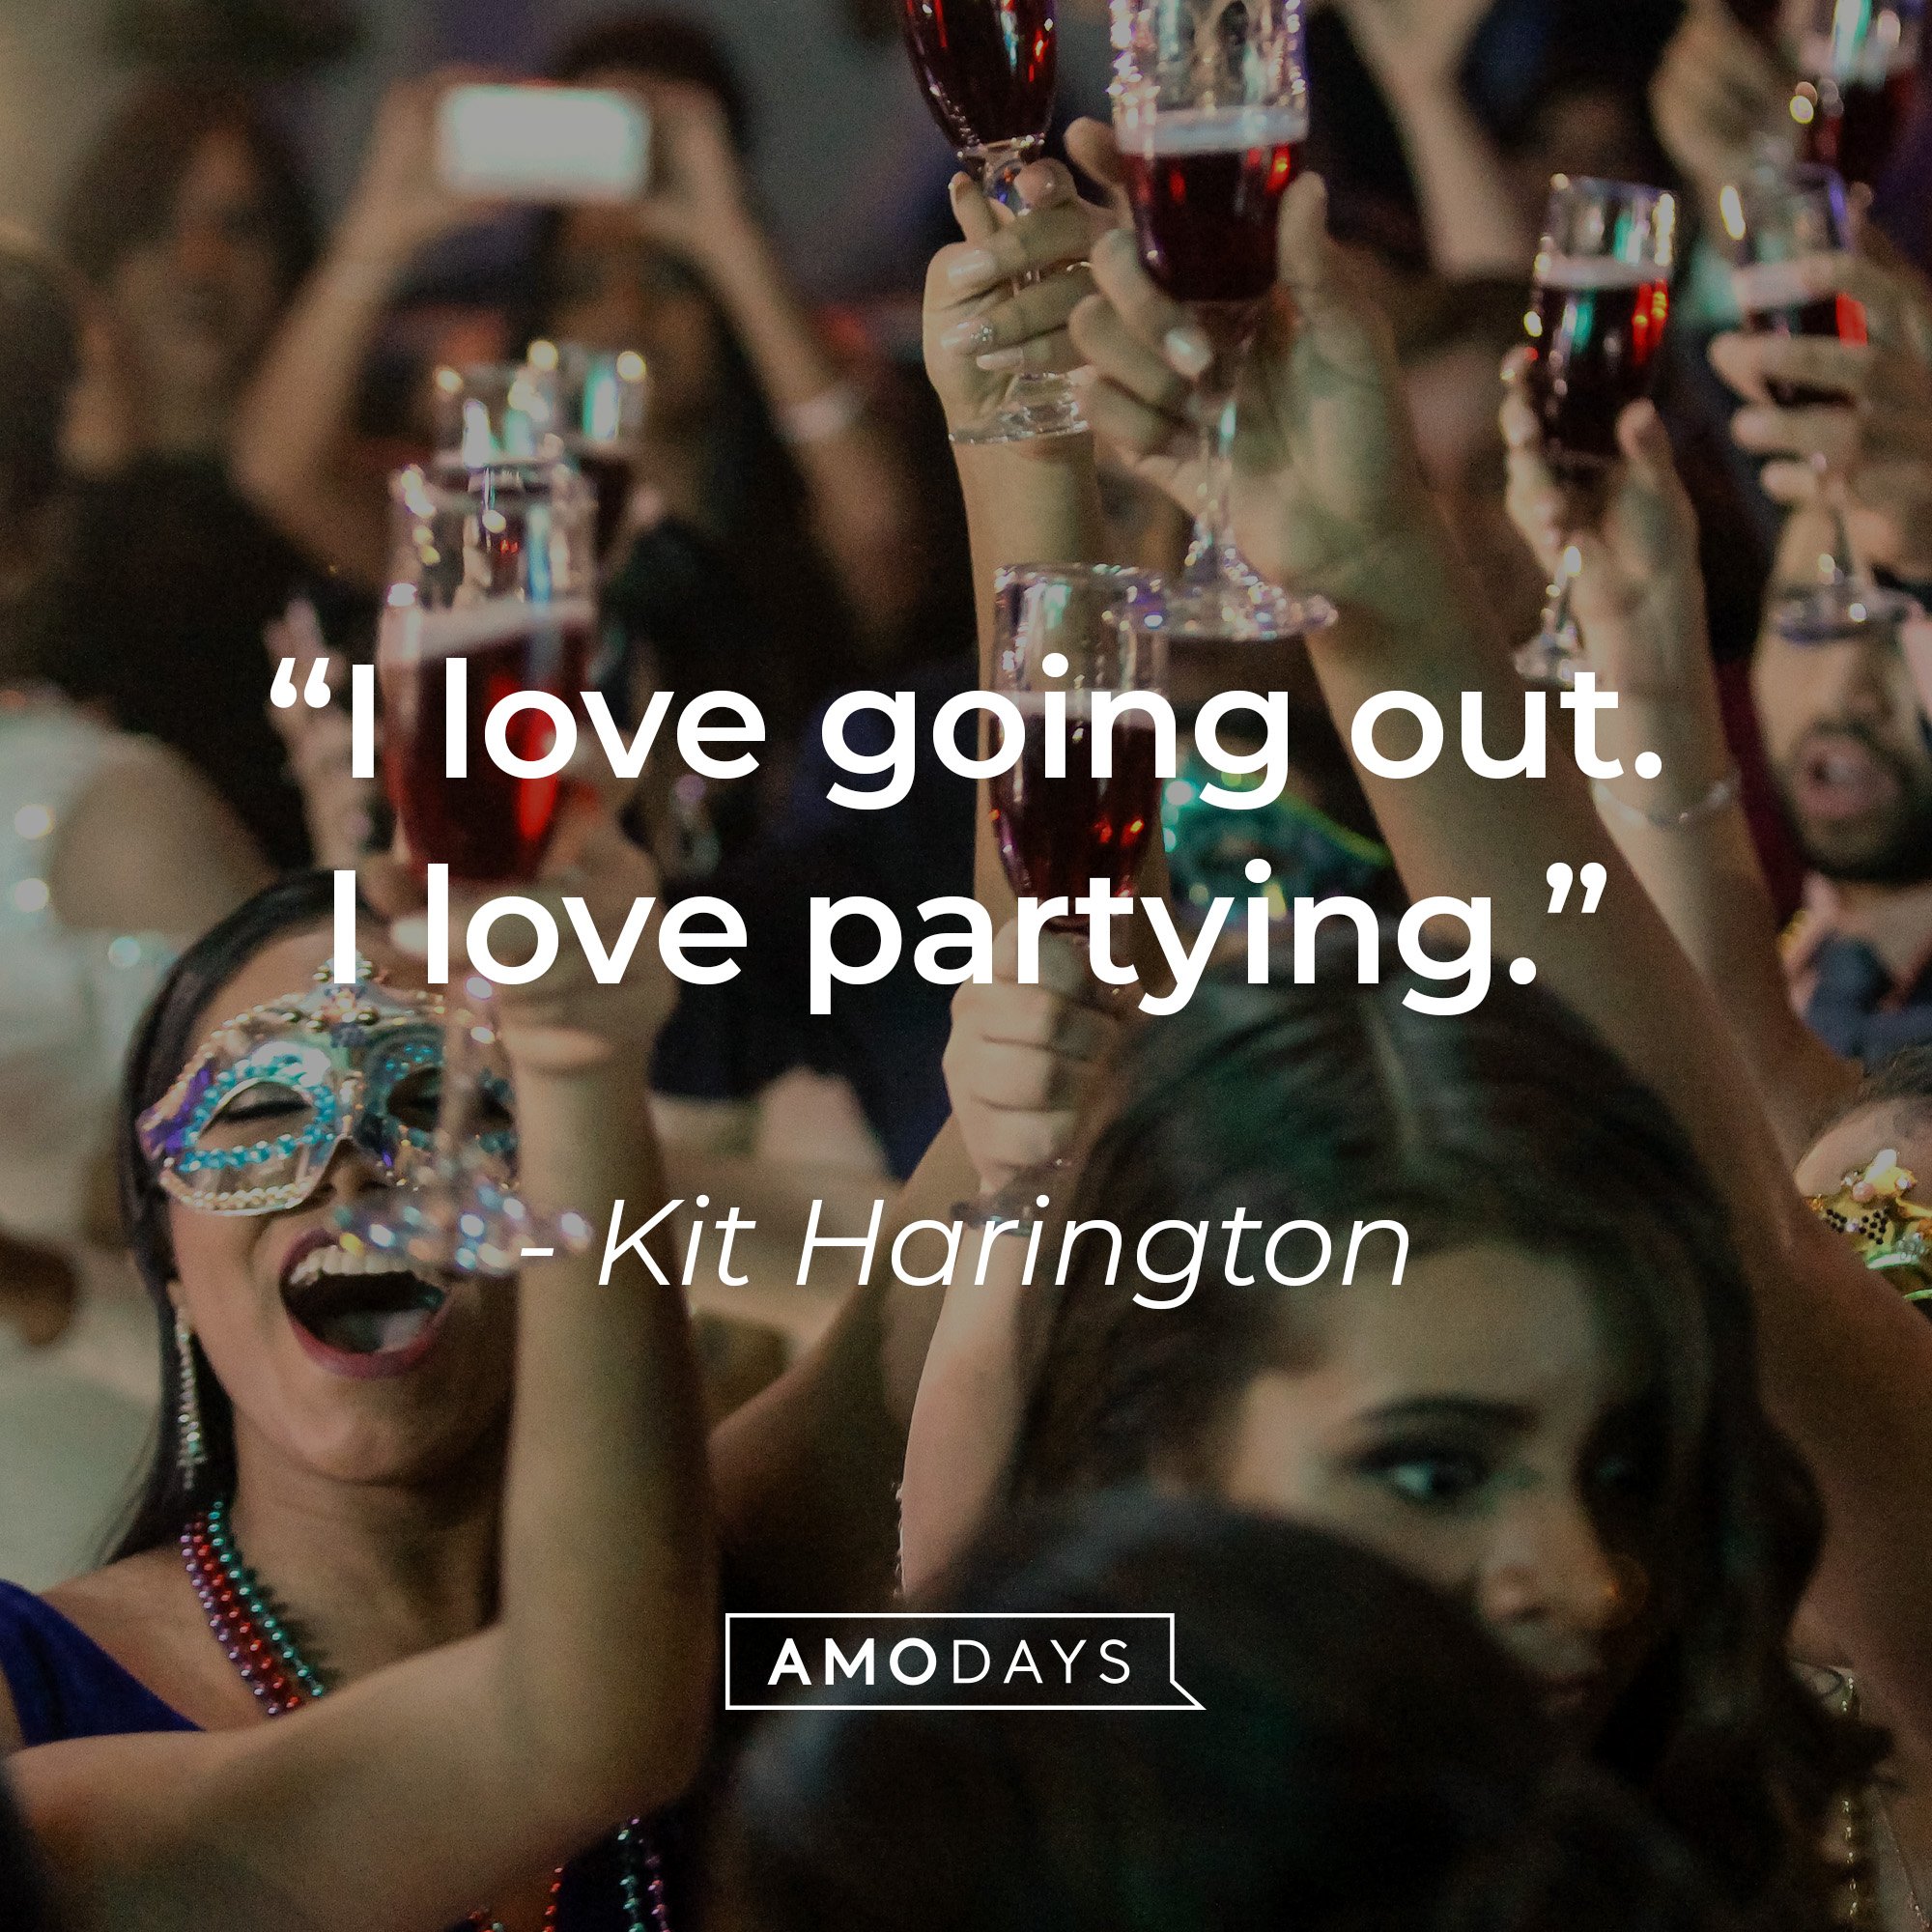 Kit Harrington's quote: "I love going out, I love partying." | Image: AmoDays 